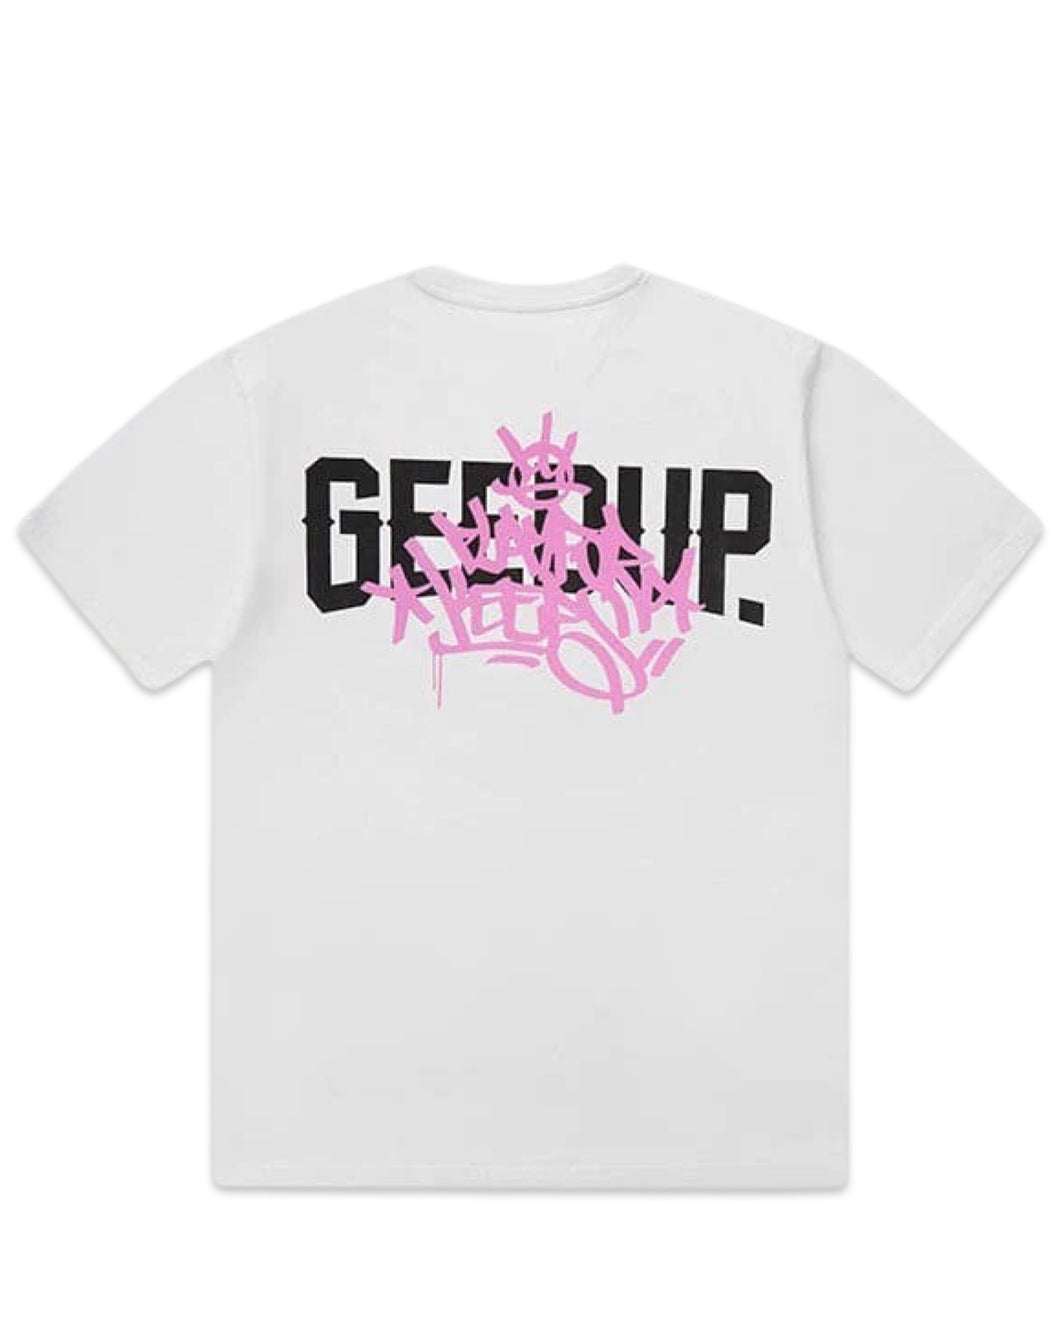 Geedup PFK Play for Keeps Graff Short Sleeve T-Shirt in White/Pink